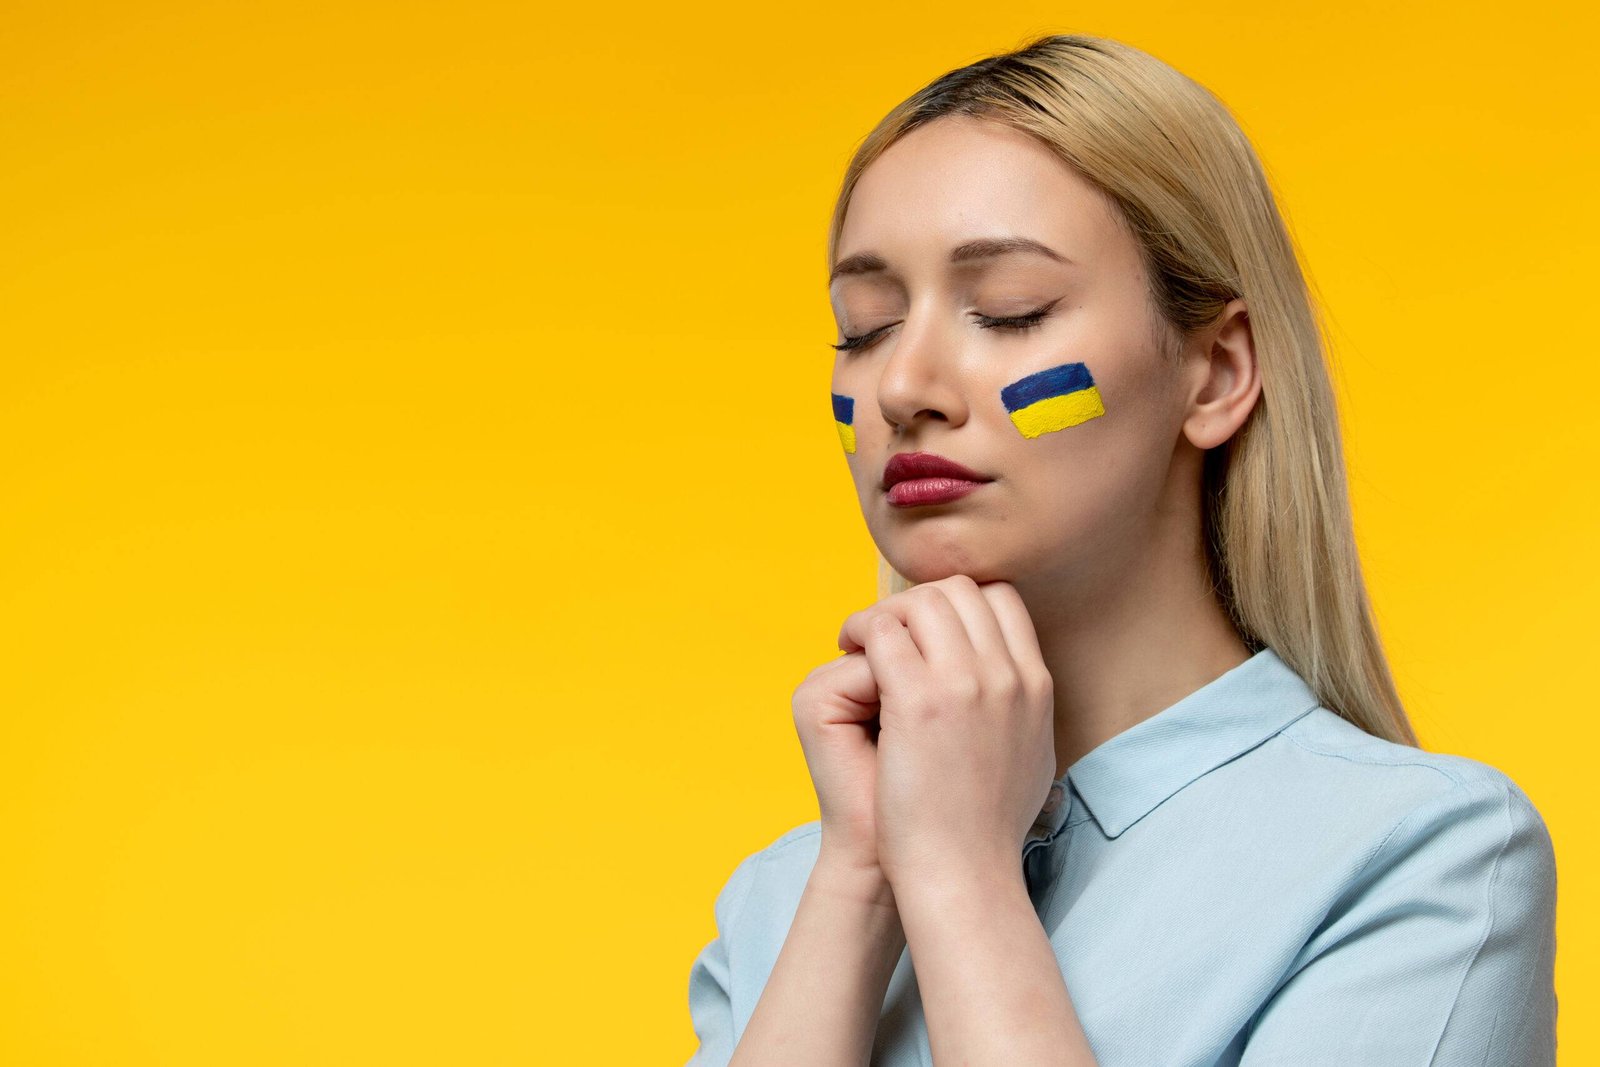 russian-ukrainian-conflict-young-cute-girl-with-ukrainian-flag-on-cheeks-praying-closed-eyes